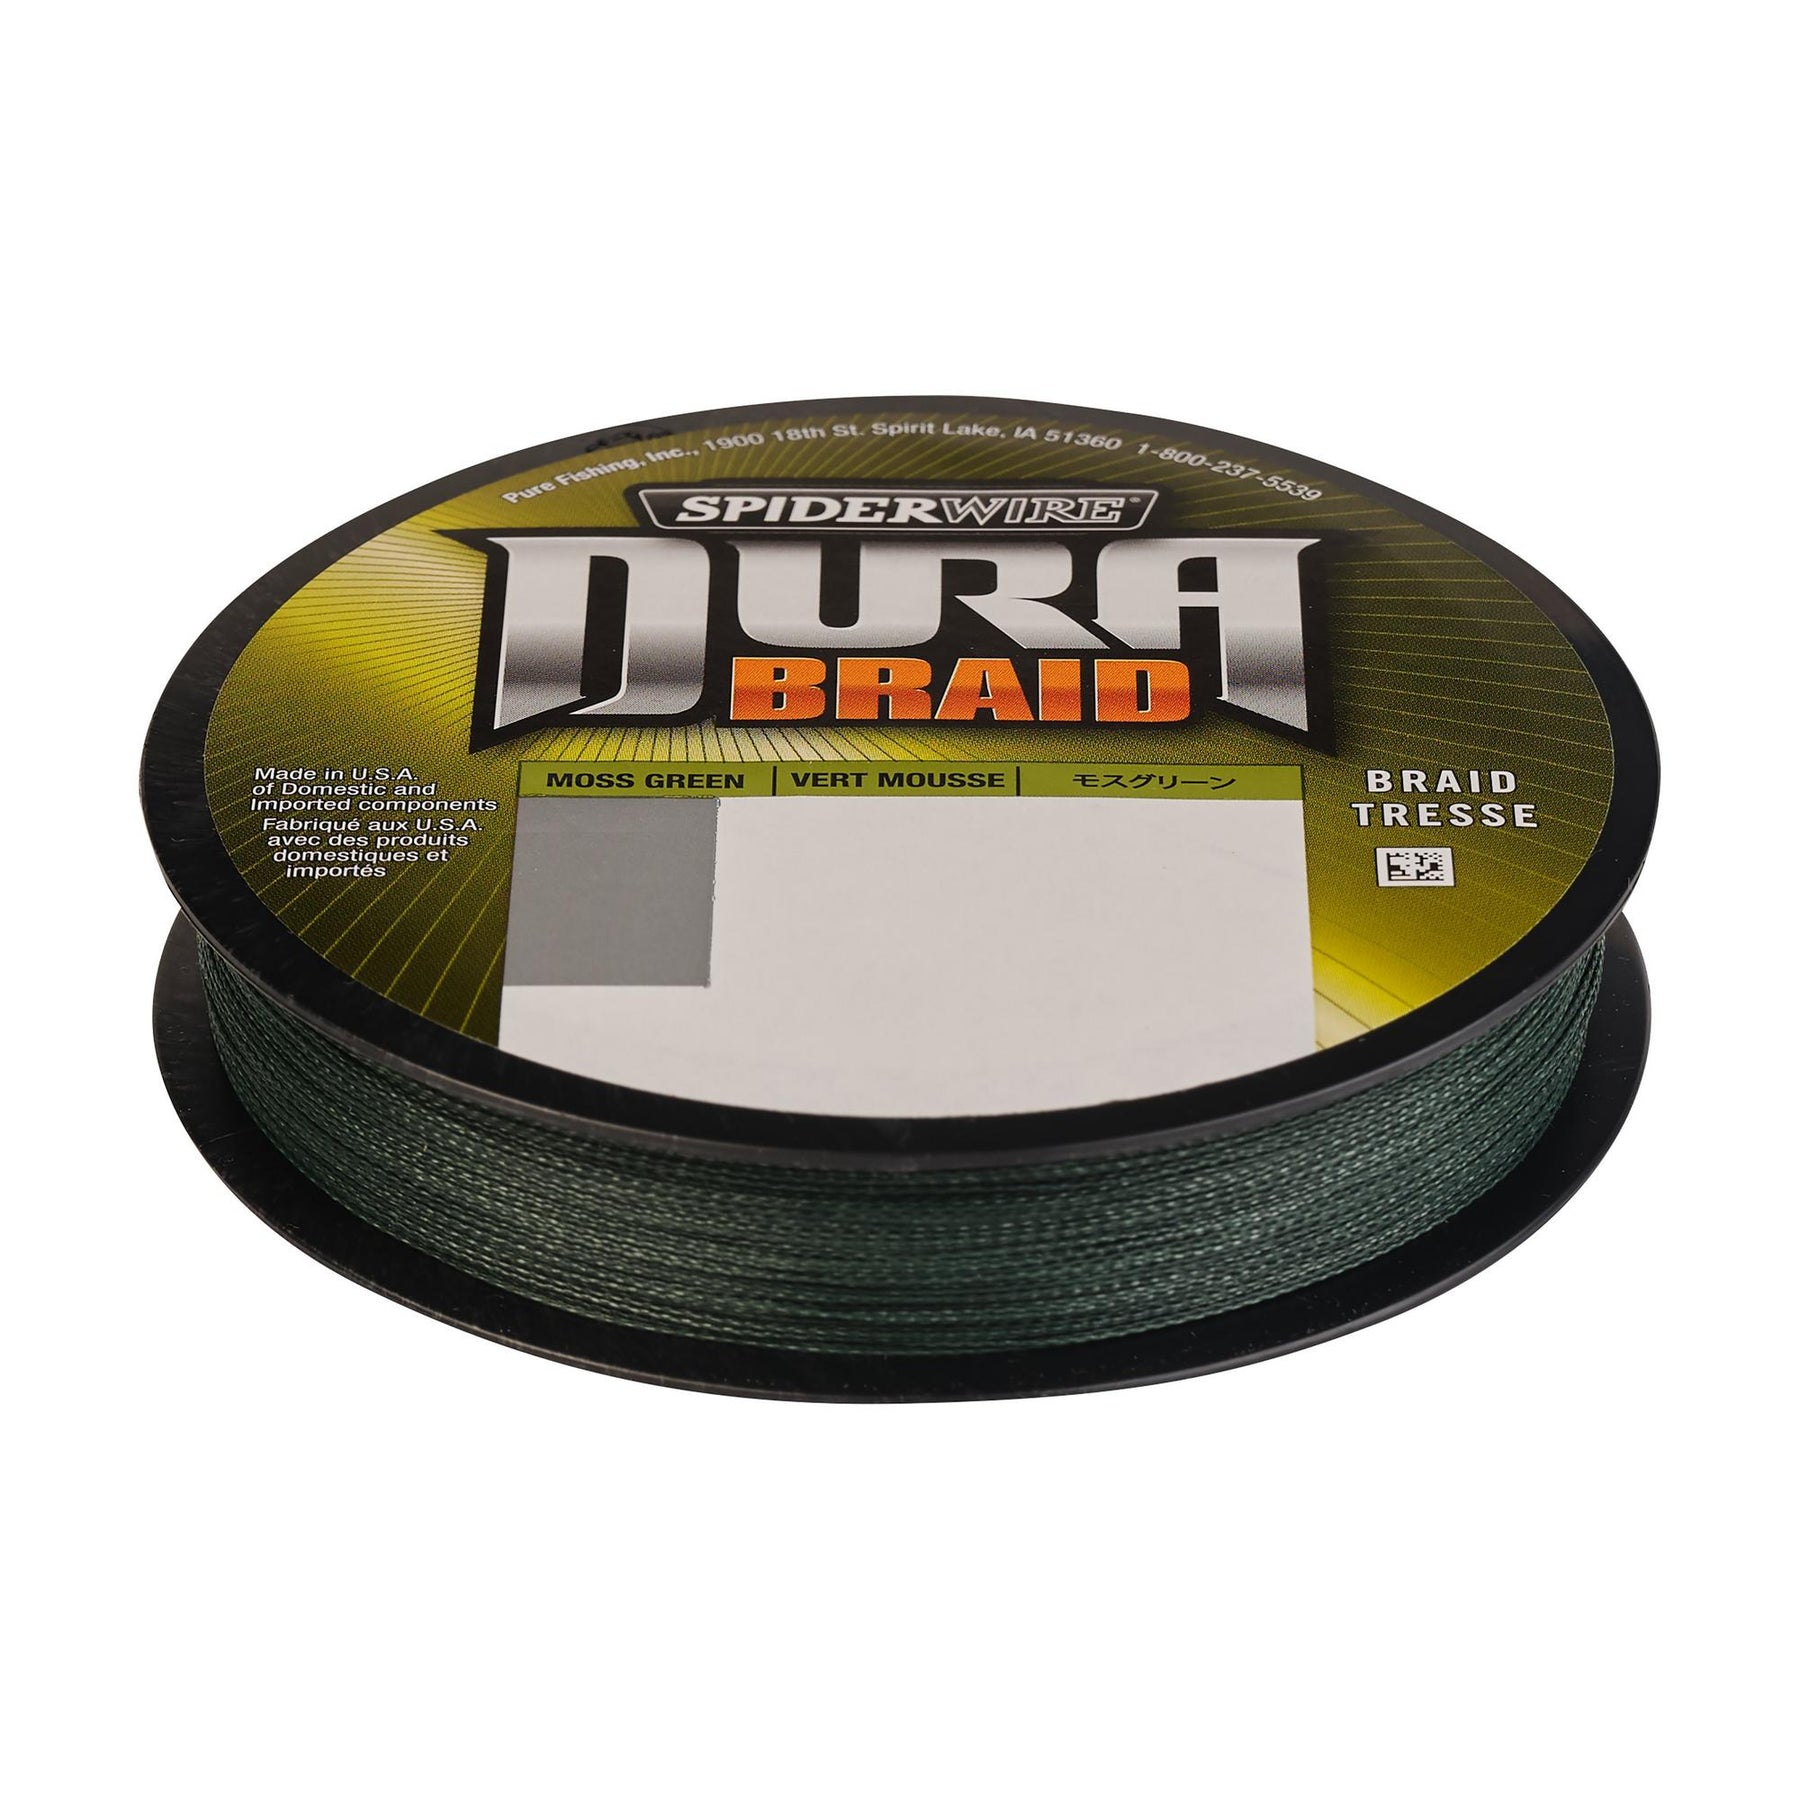 Spiderwire Stealth Camo/Moss Green Fishing Braid - 300YDS - All